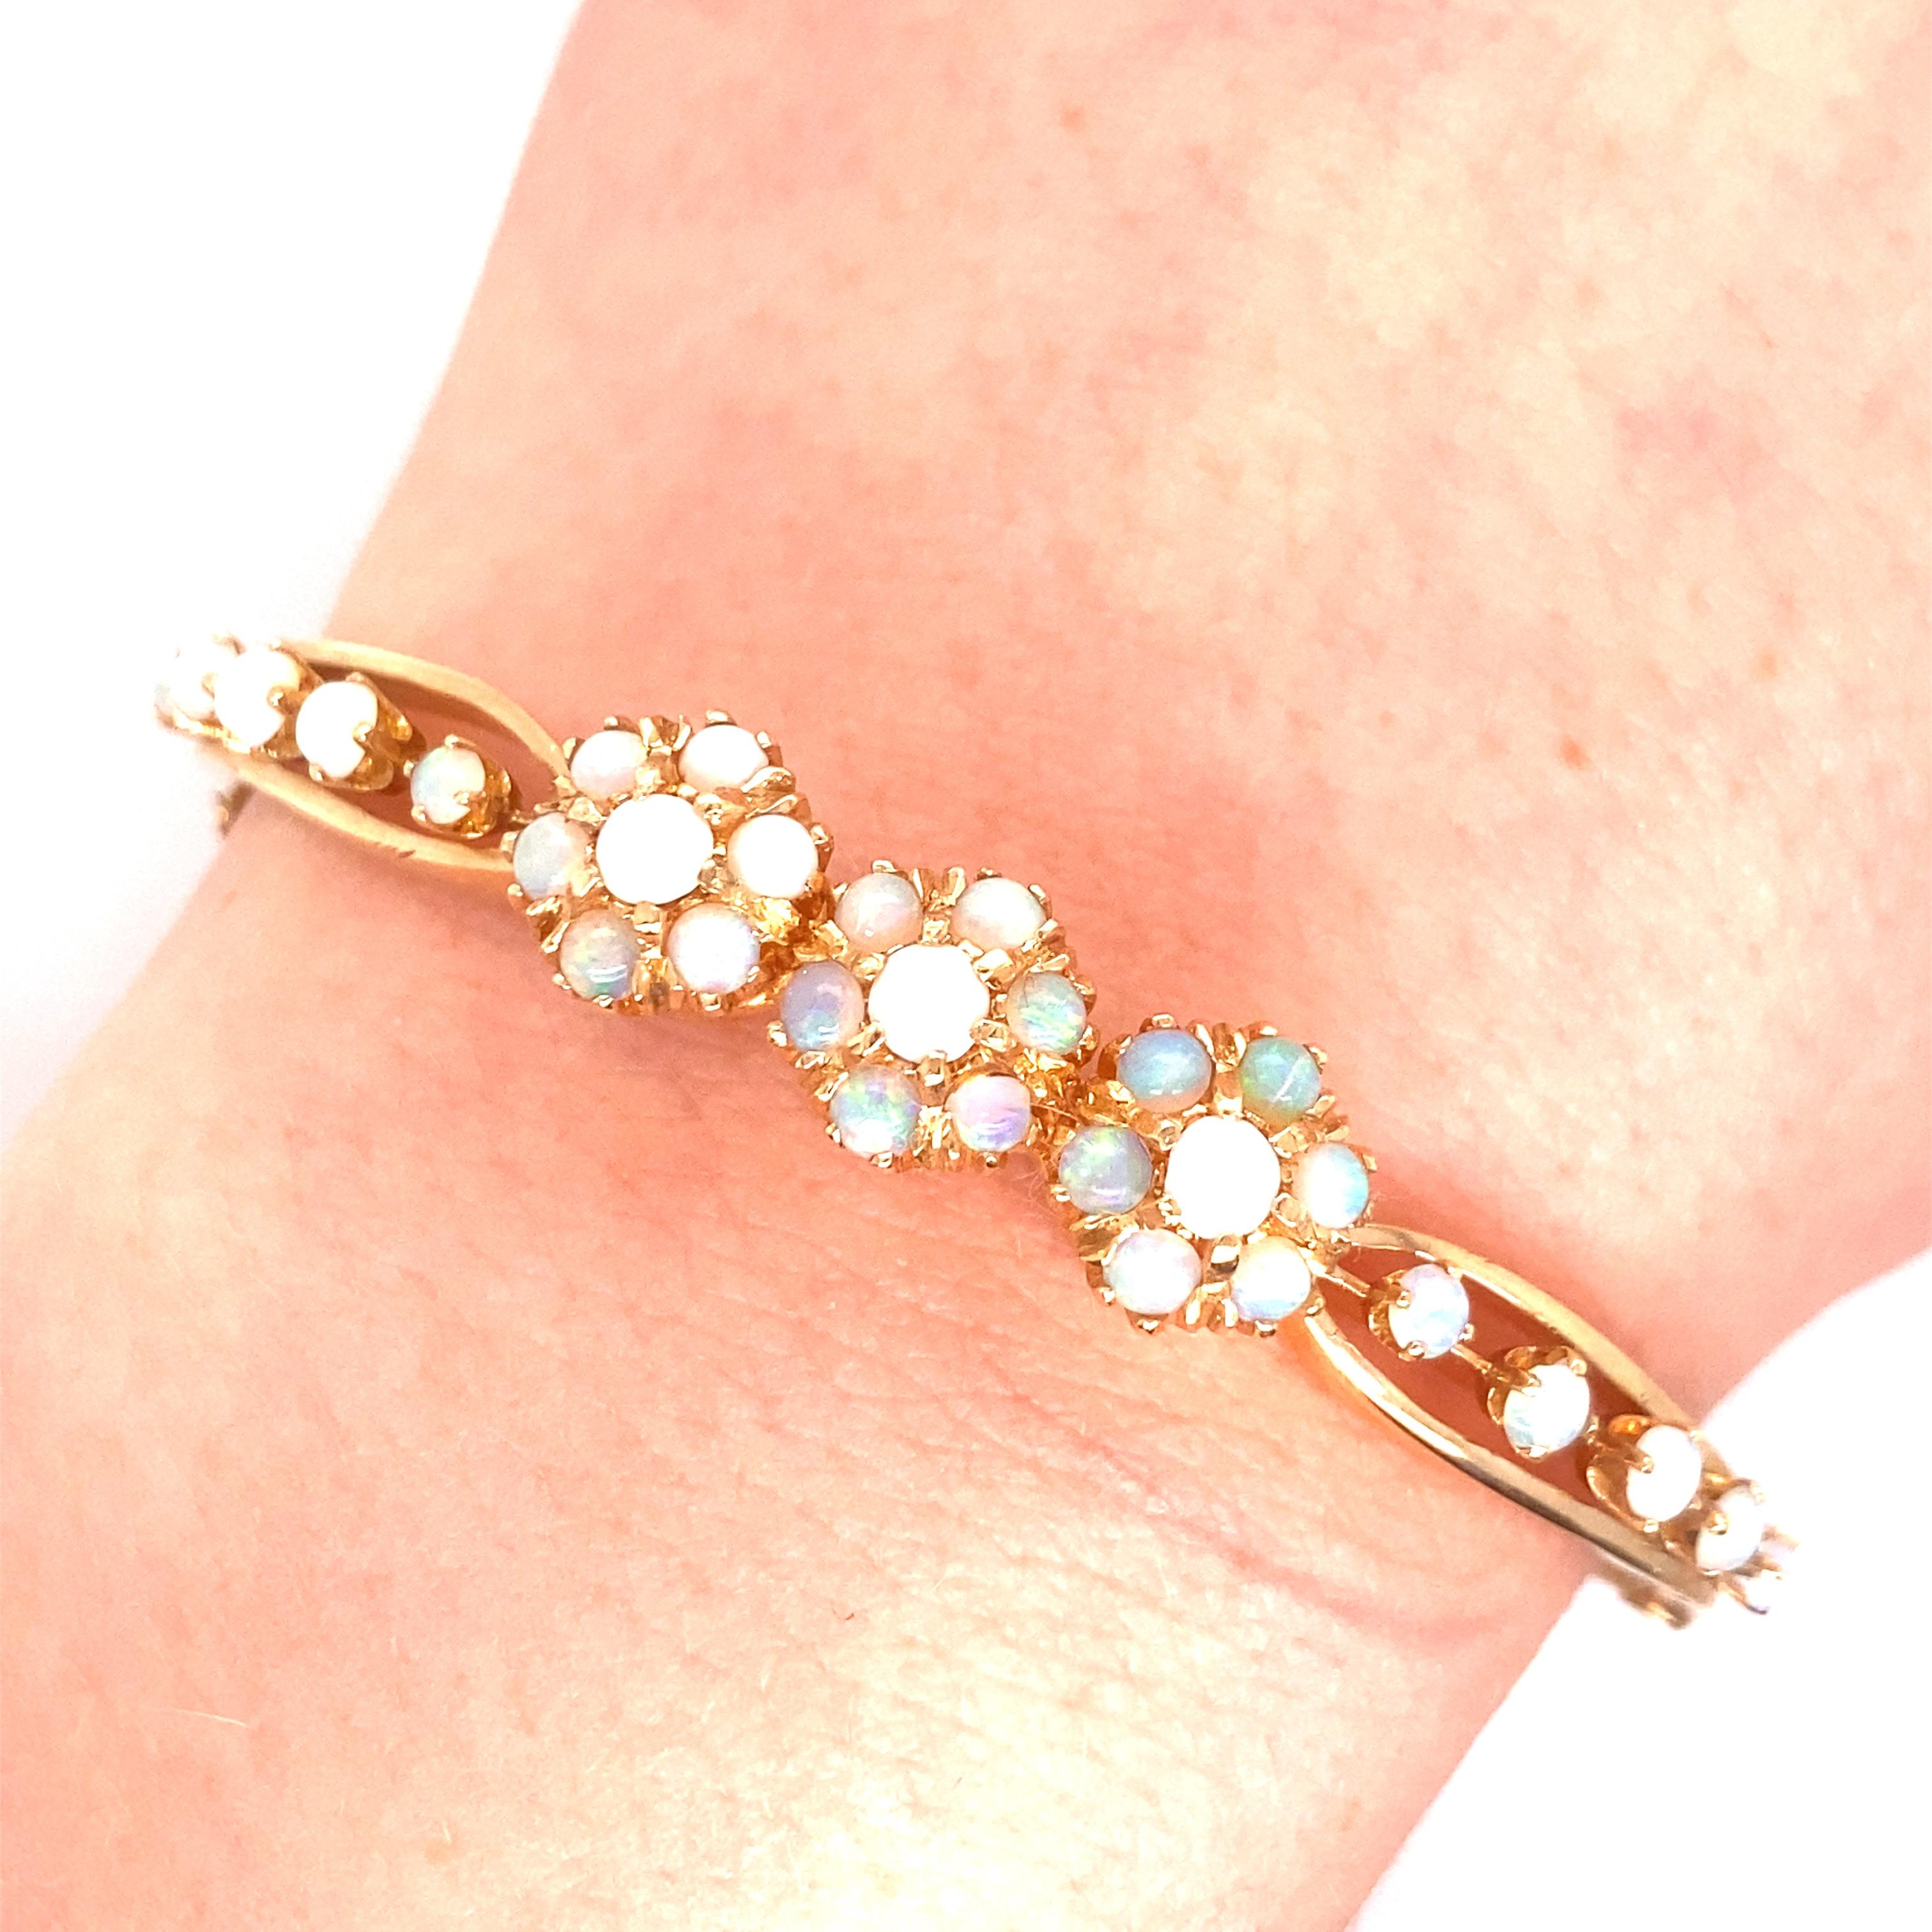 Vintage 14K Yellow Gold Victorian Reproduction Opal Bangle Bracelet - The bangle has 3 flowers made up with 7 round opals each with an additional 5 opals on each side. The opals exhibit both green and red play of color. The bracelet's width is .35